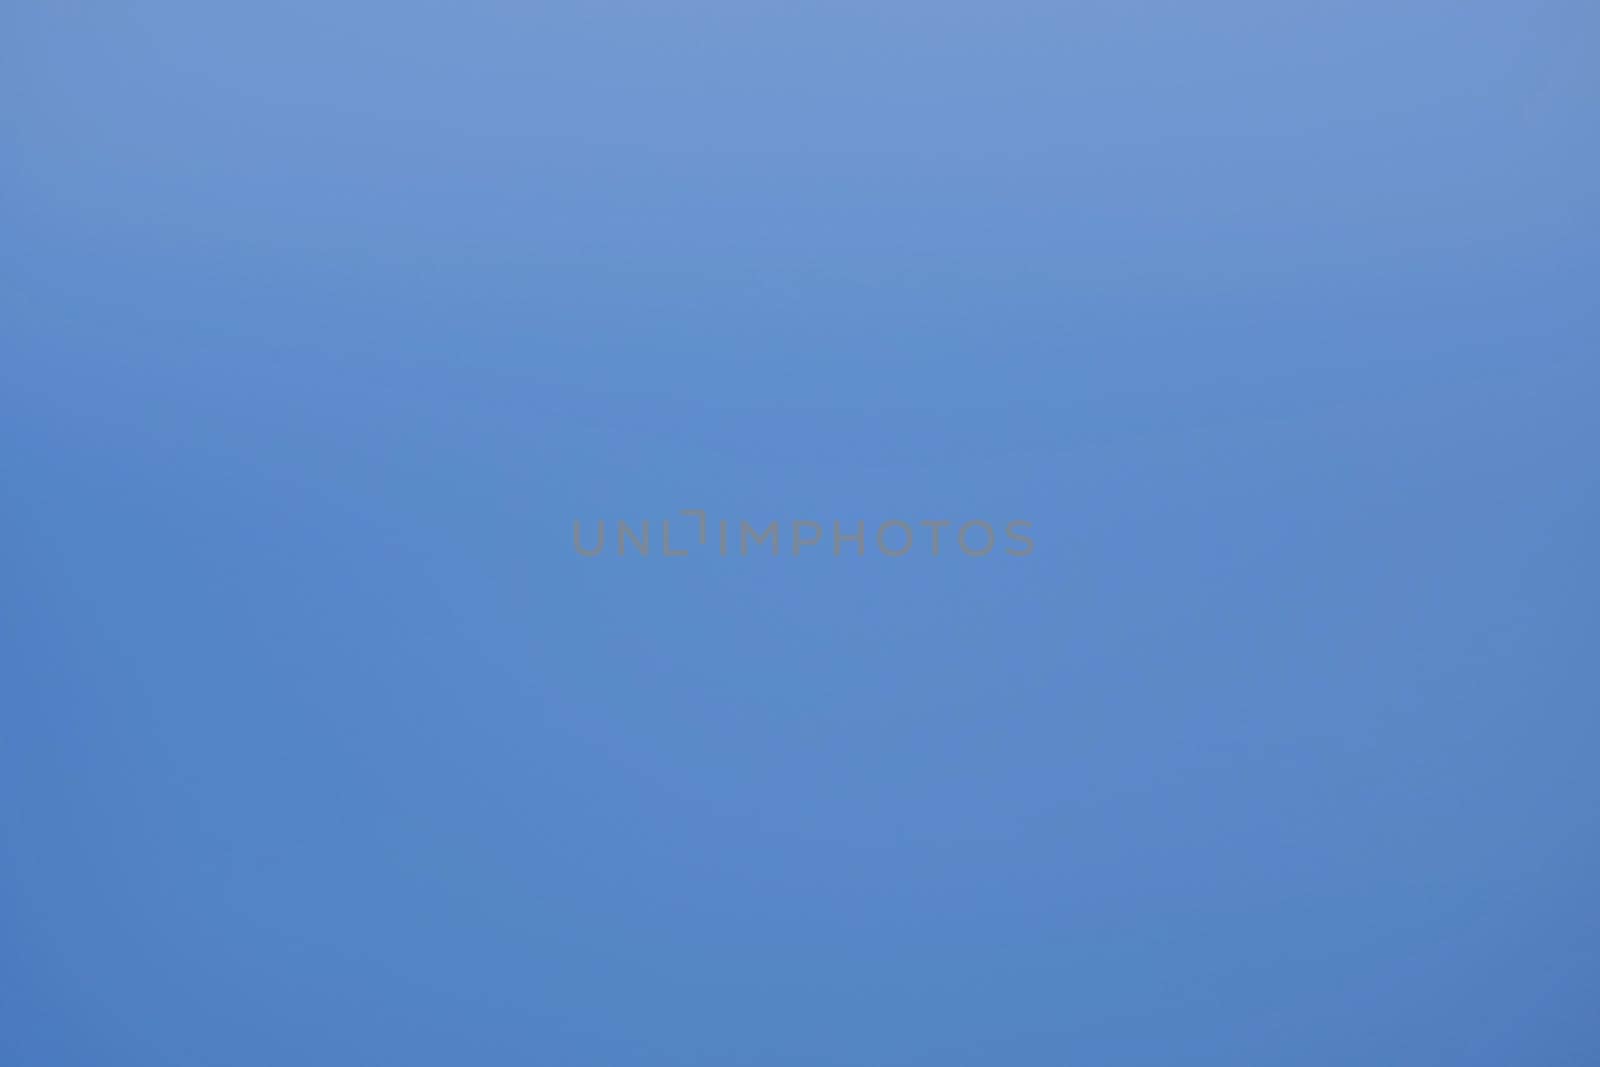 Smooth gradient background, clearempty blue texture for text. blue sky abstract